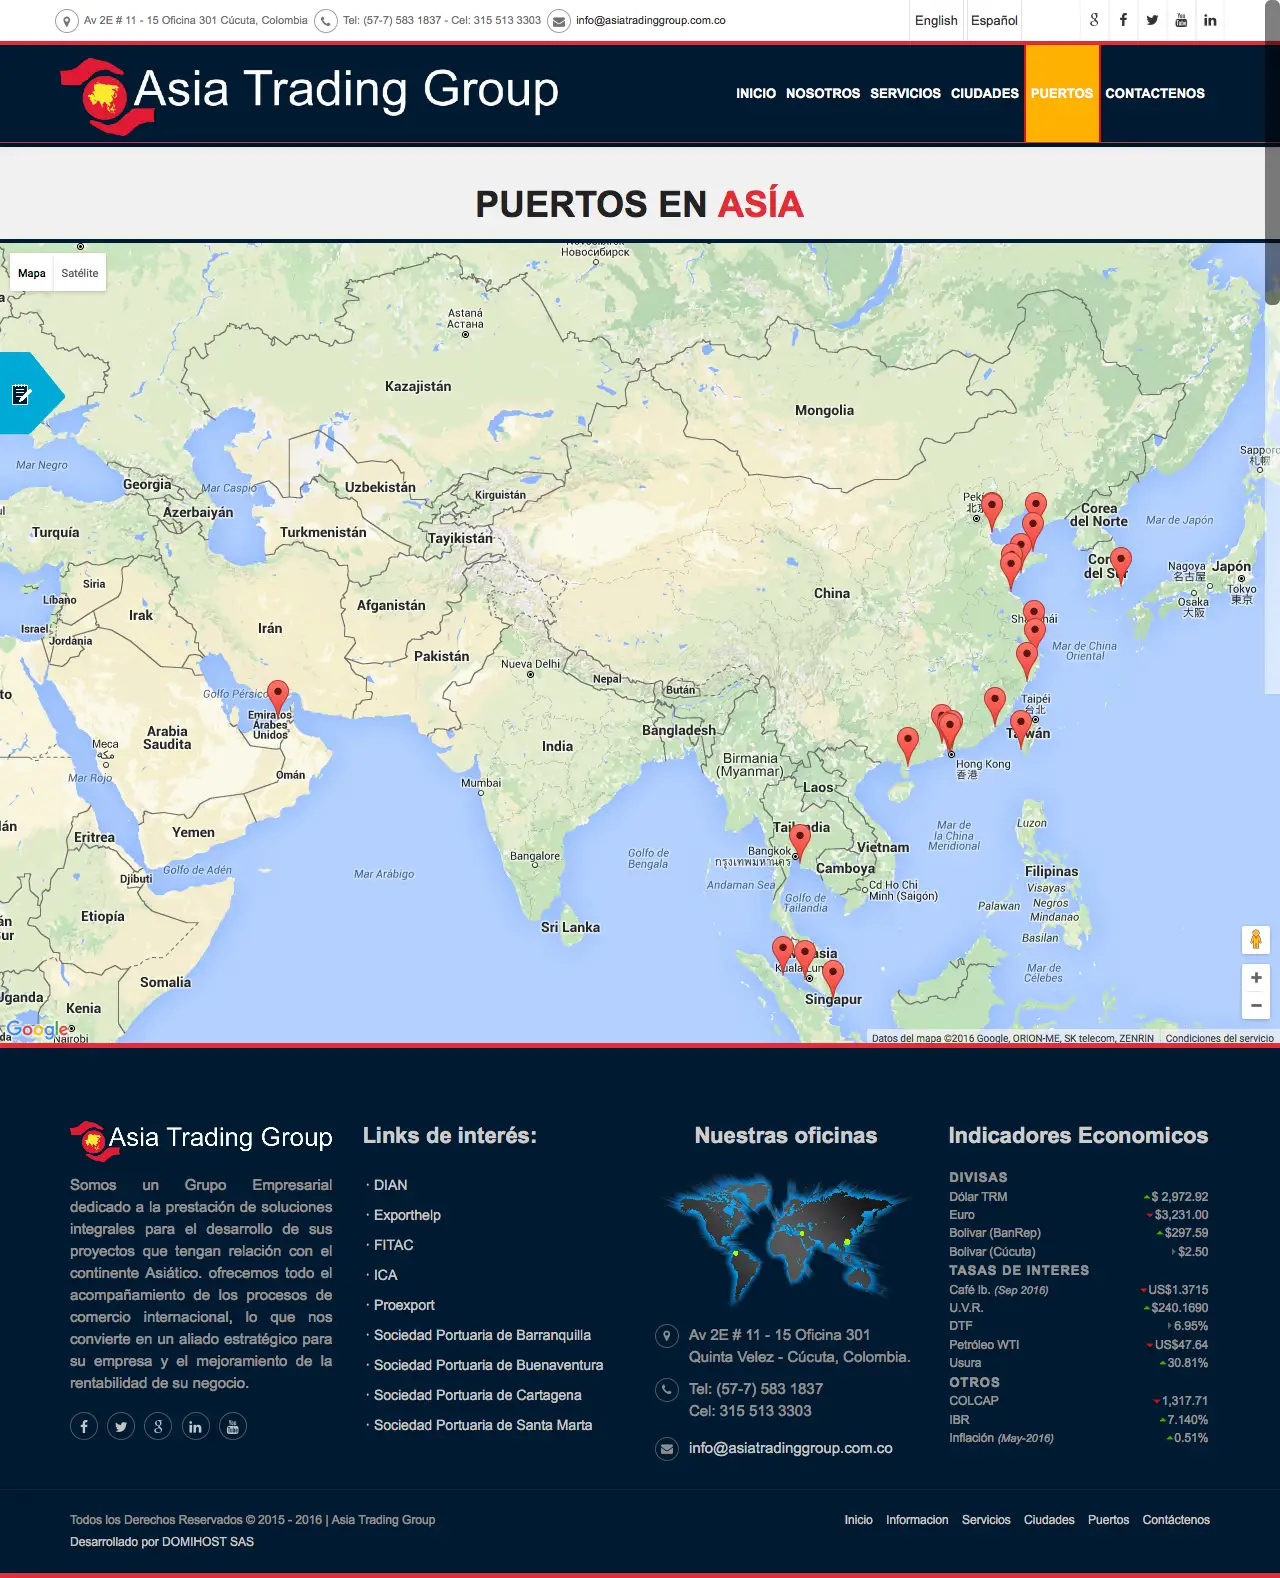 Puertos I Asia Trading Group.png